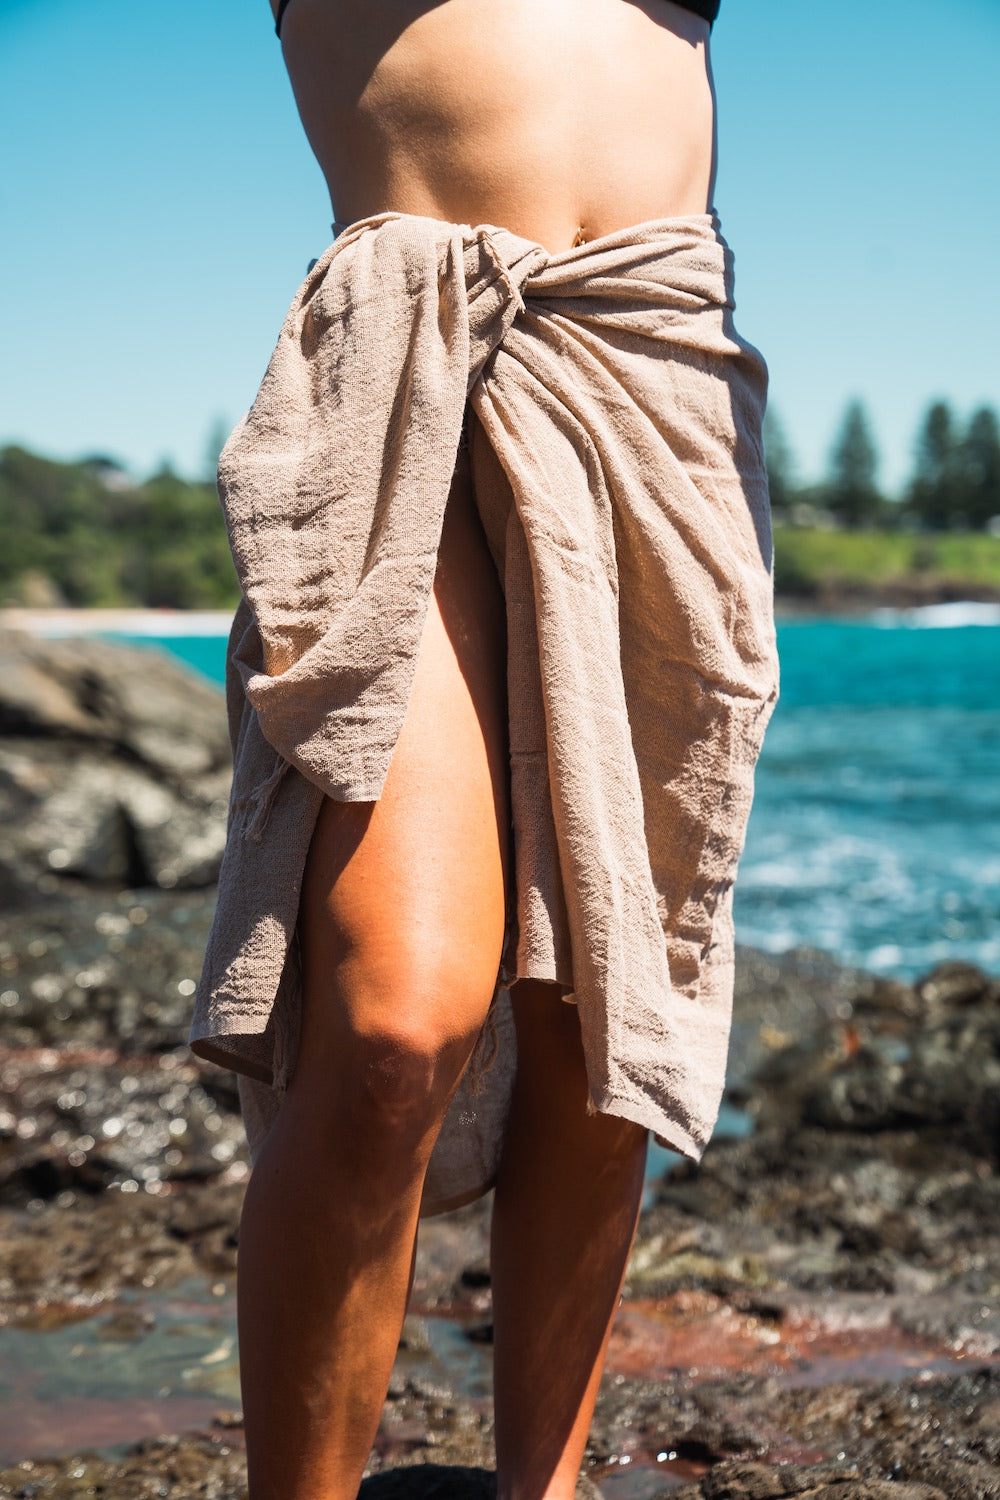 Tan Ramie sarong - Natural tan colour beach cover up made from hemp and textured like linen - Malia the label beach clothing - Vacation wear